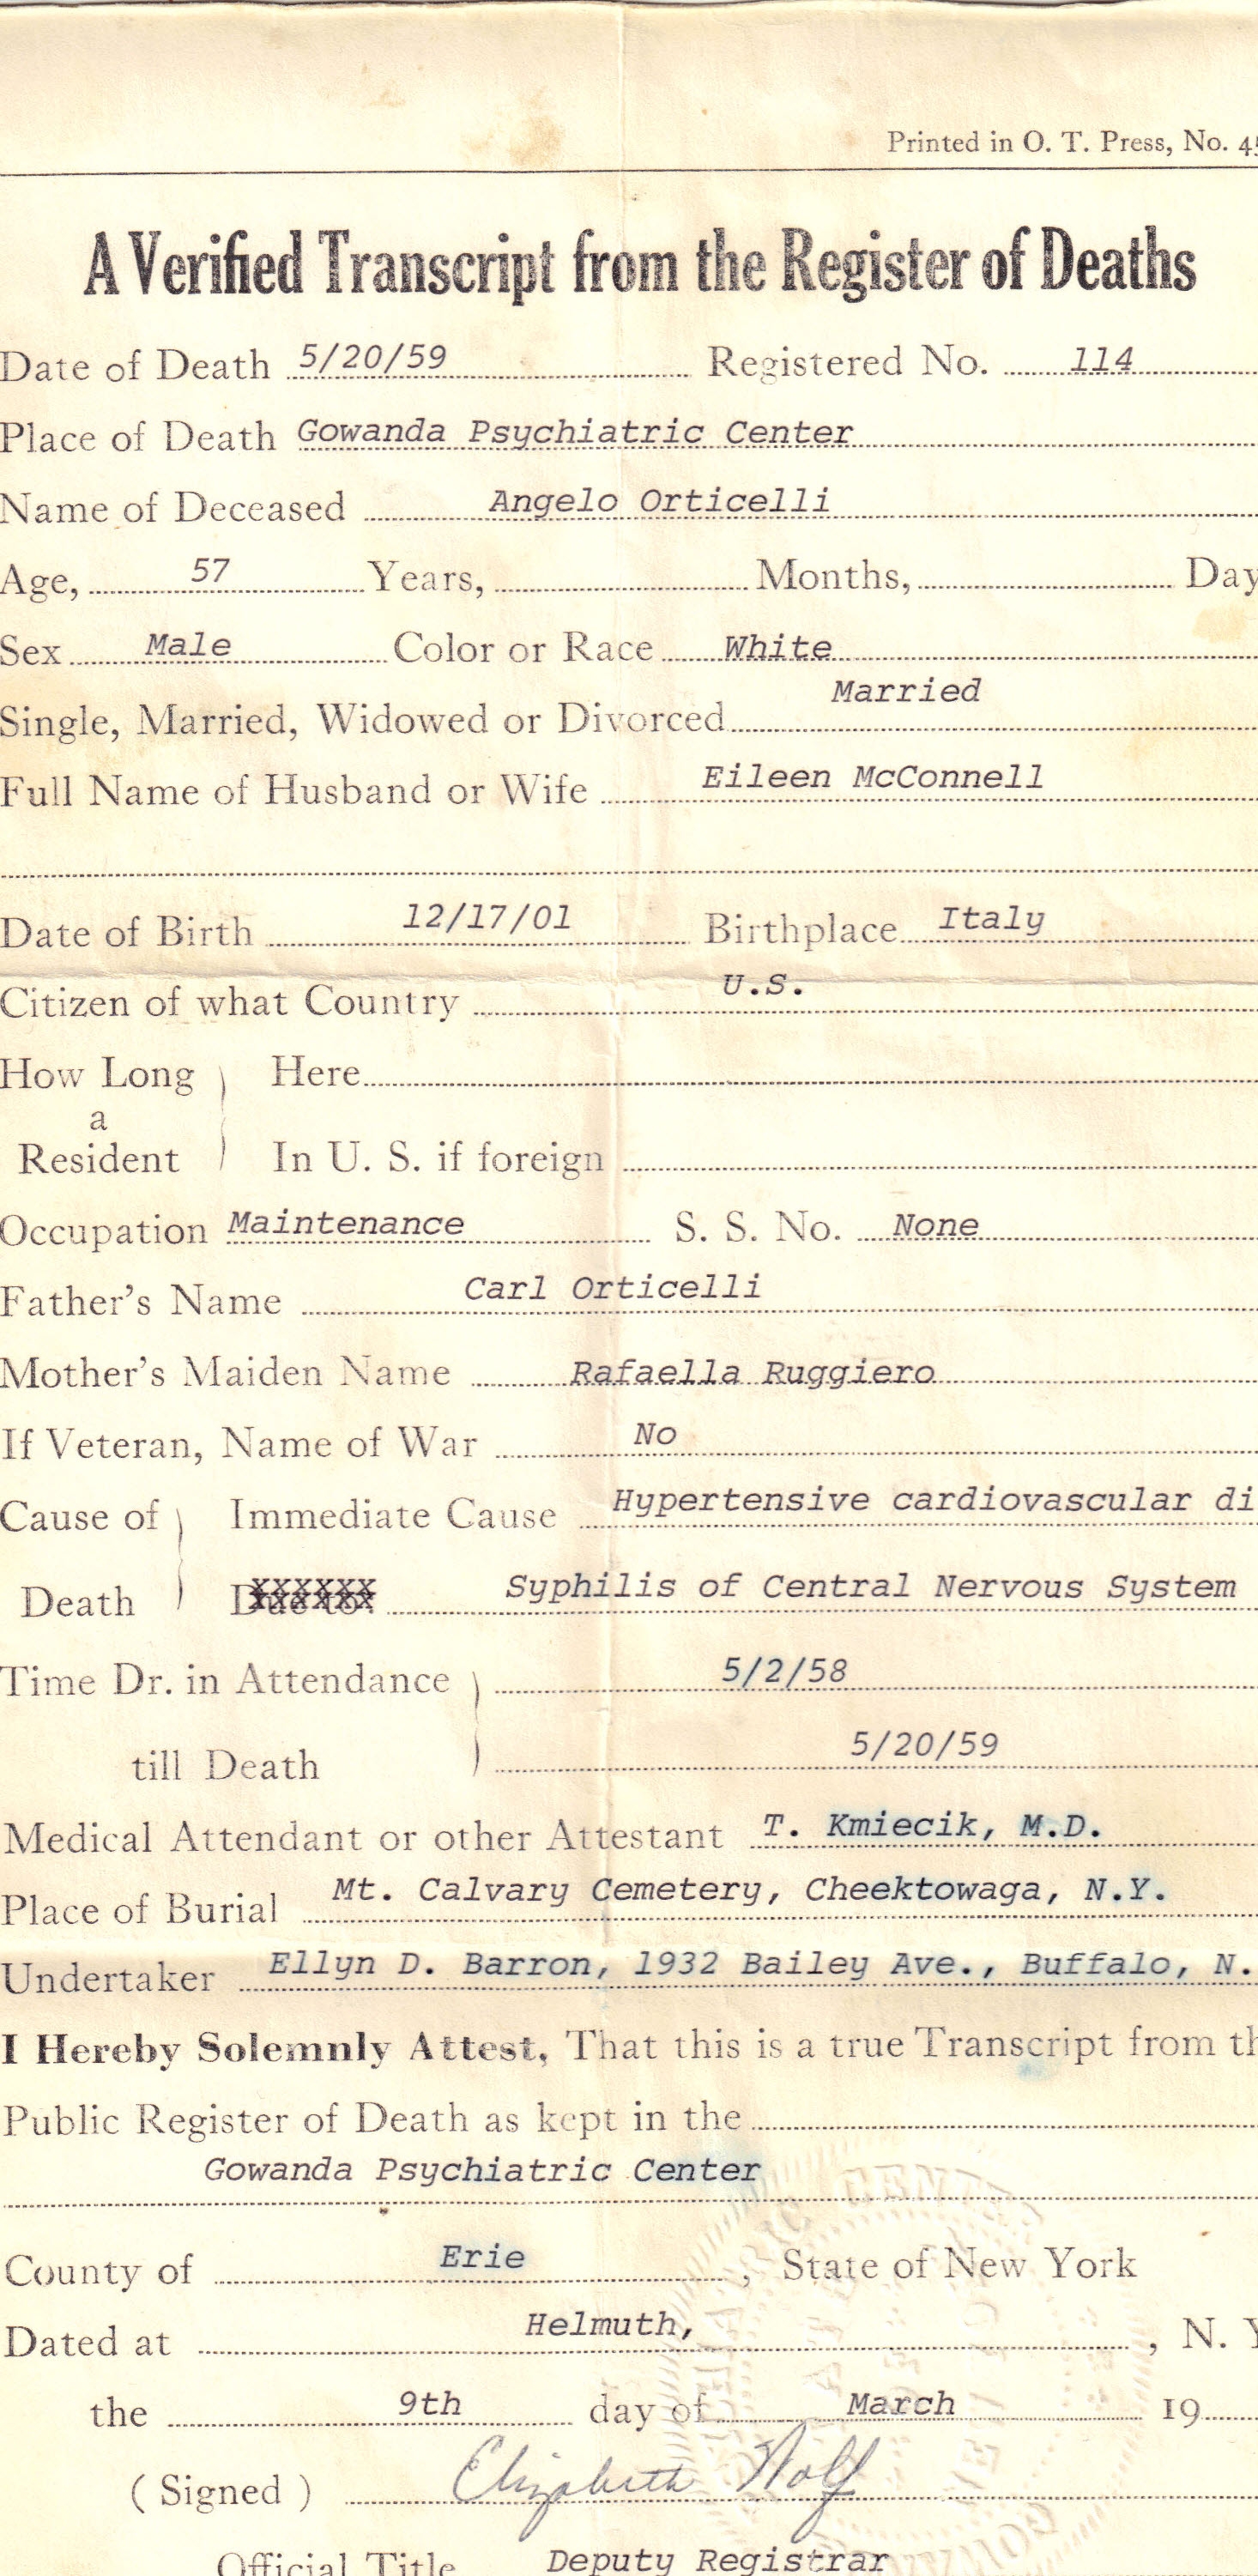 Angelo Orticelli Death Register